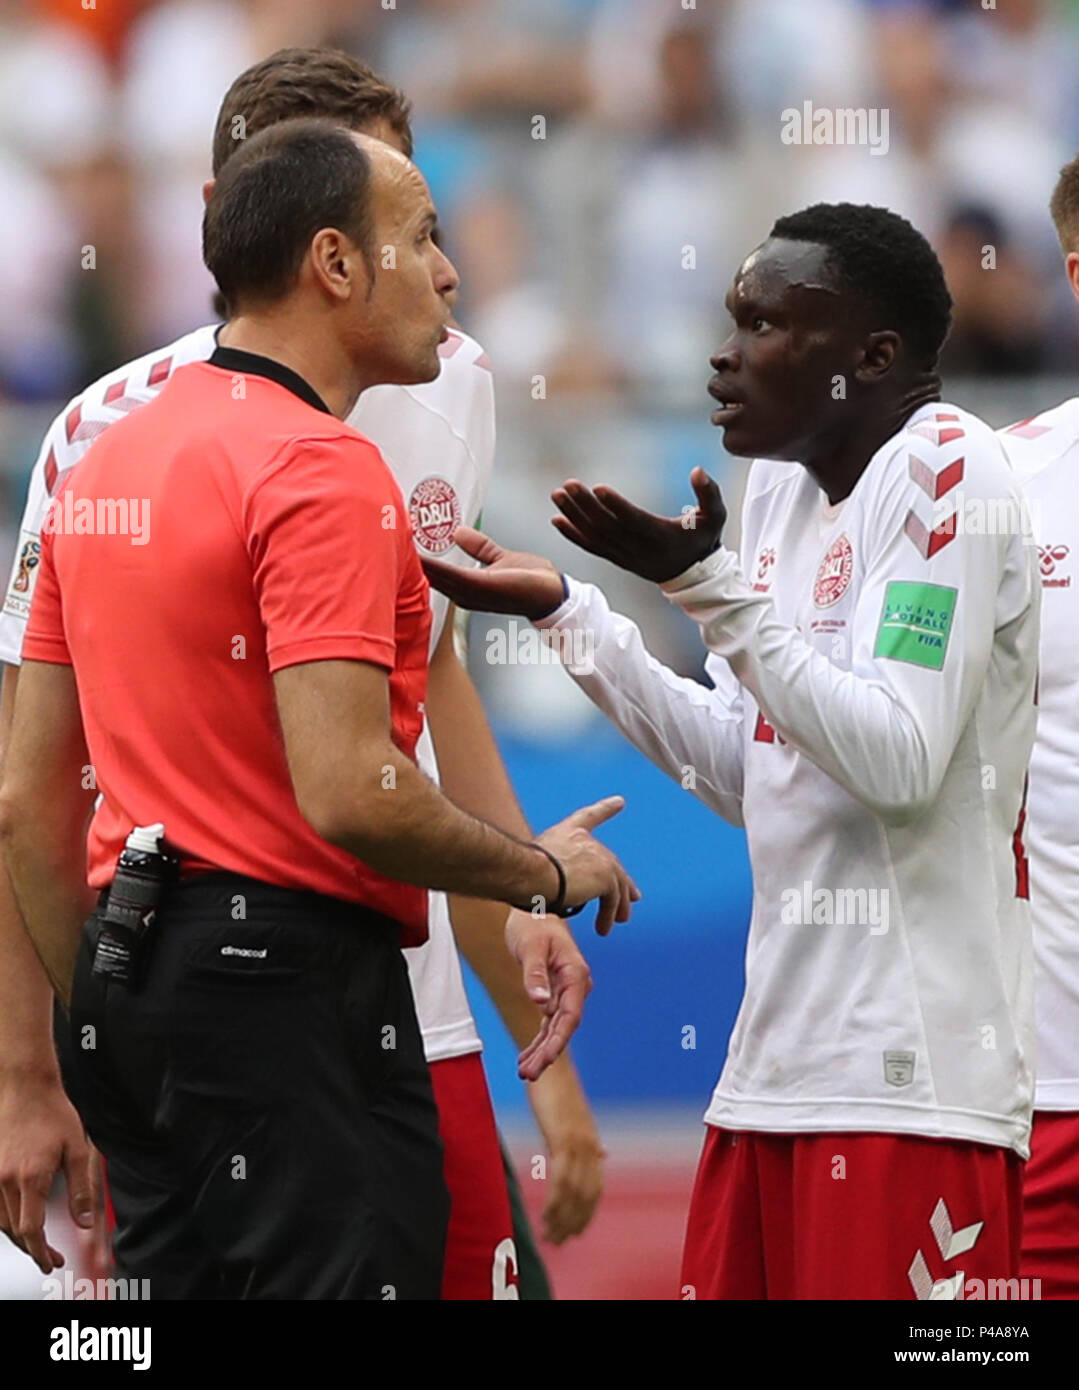 Samara, Russia. 21st June, 2018. Pione Sisto (R) of Denmark argues with the referee during the 2018 FIFA World Cup Group C match between Denmark and Australia in Samara, Russia, June 21, 2018. Credit: Fei Maohua/Xinhua/Alamy Live News Stock Photo